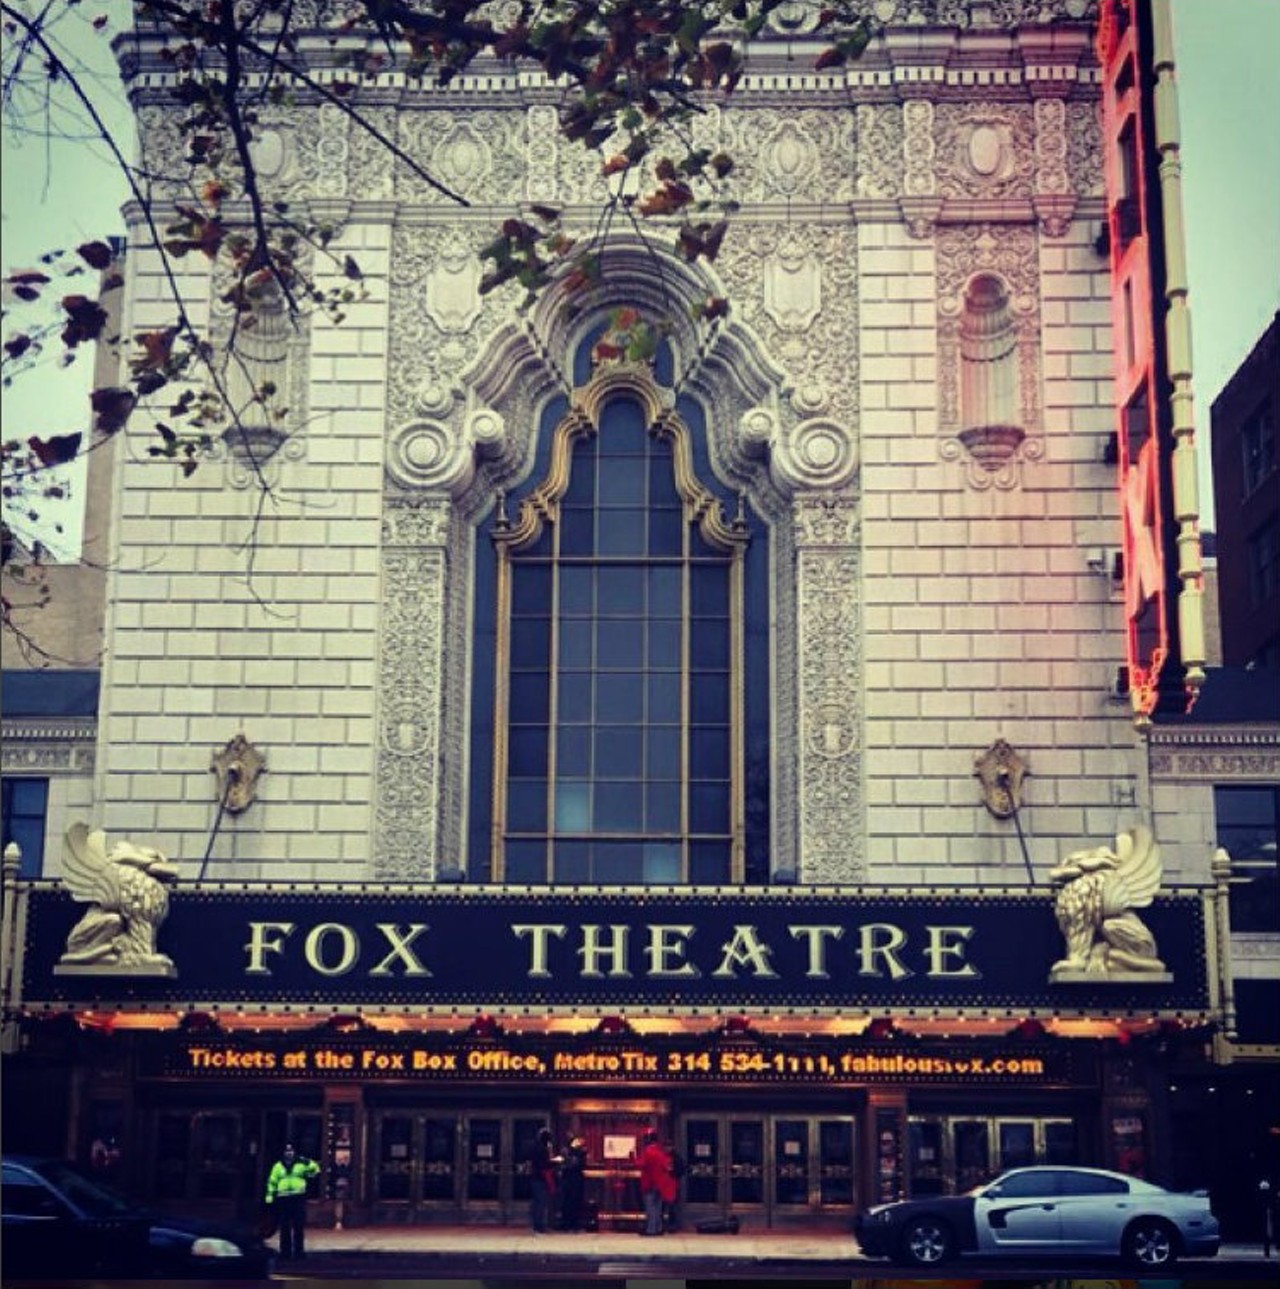 The Fabulous Fox
This historic theater is beautiful -- inside and out. Photo courtesy of Instagram / halletehbear.